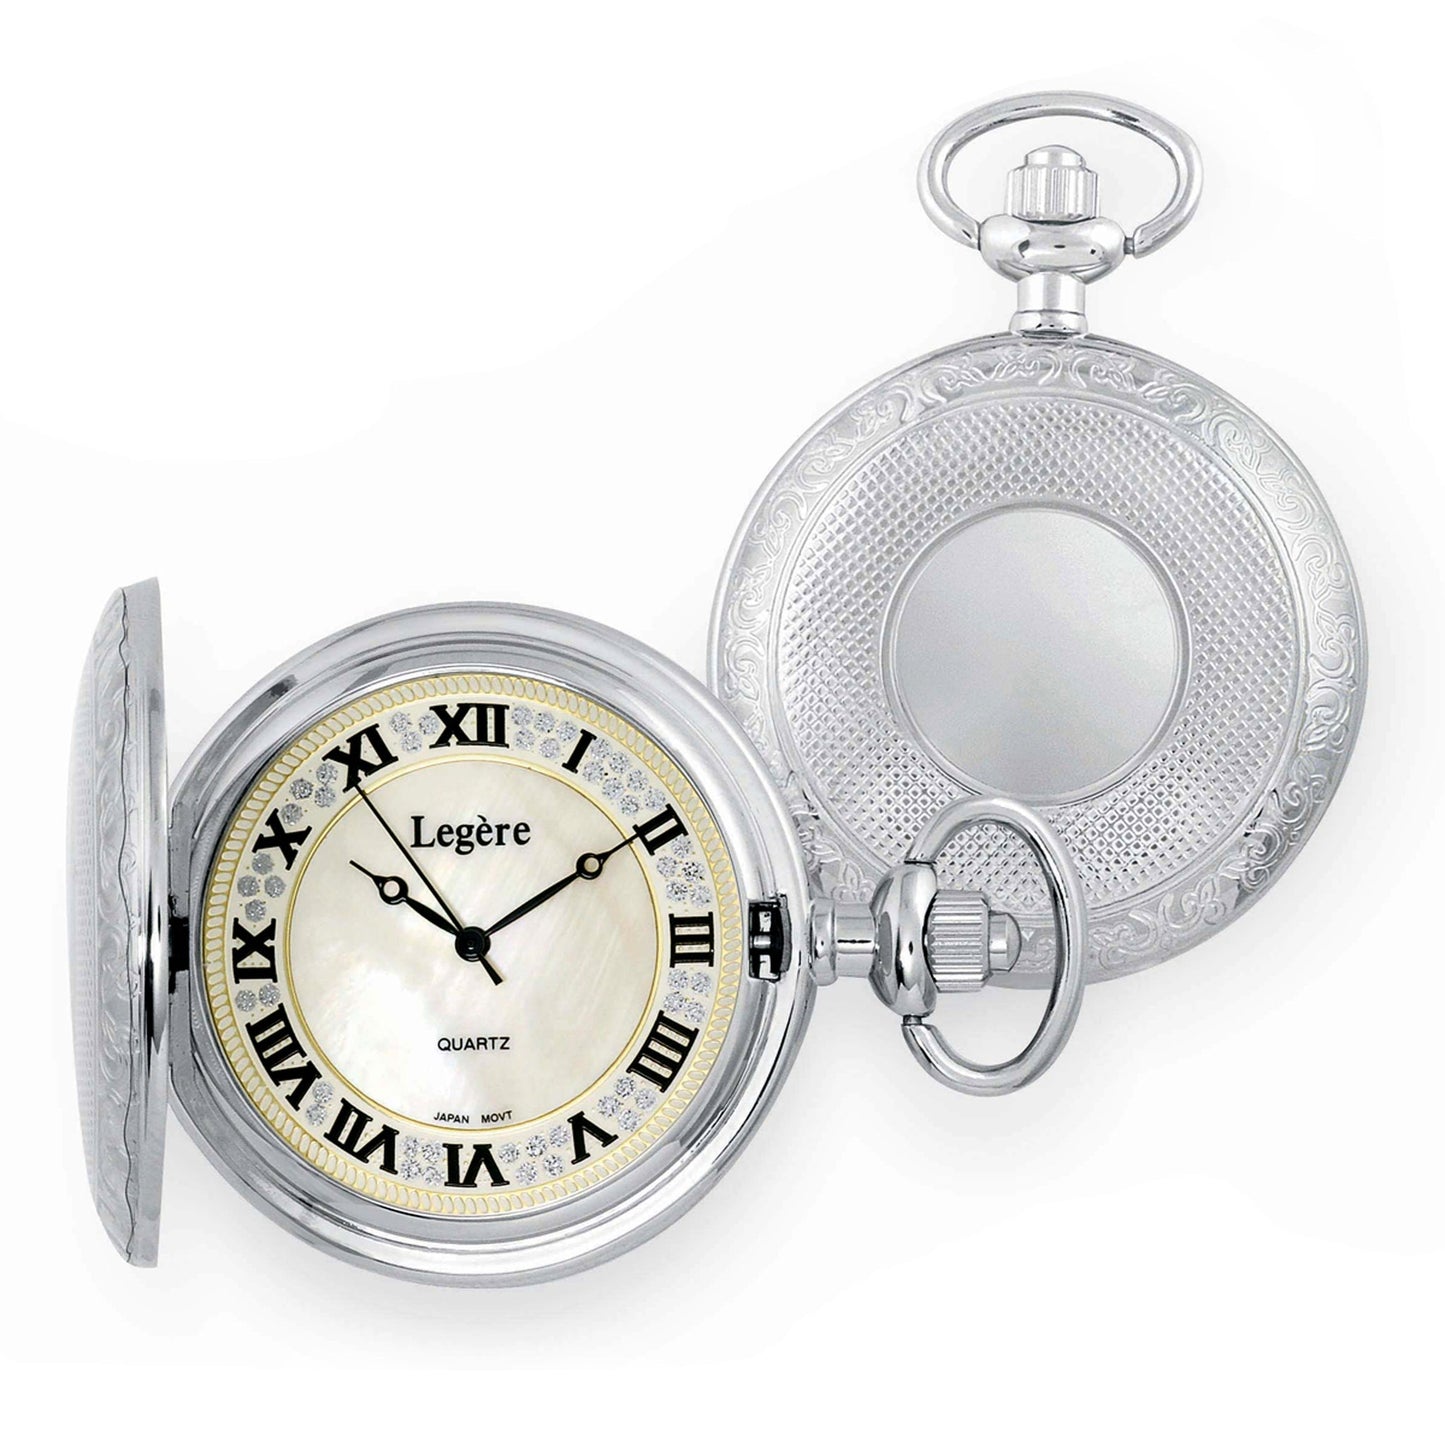 A pocket watch with mother of pearl dial displayed on a neutral white background.